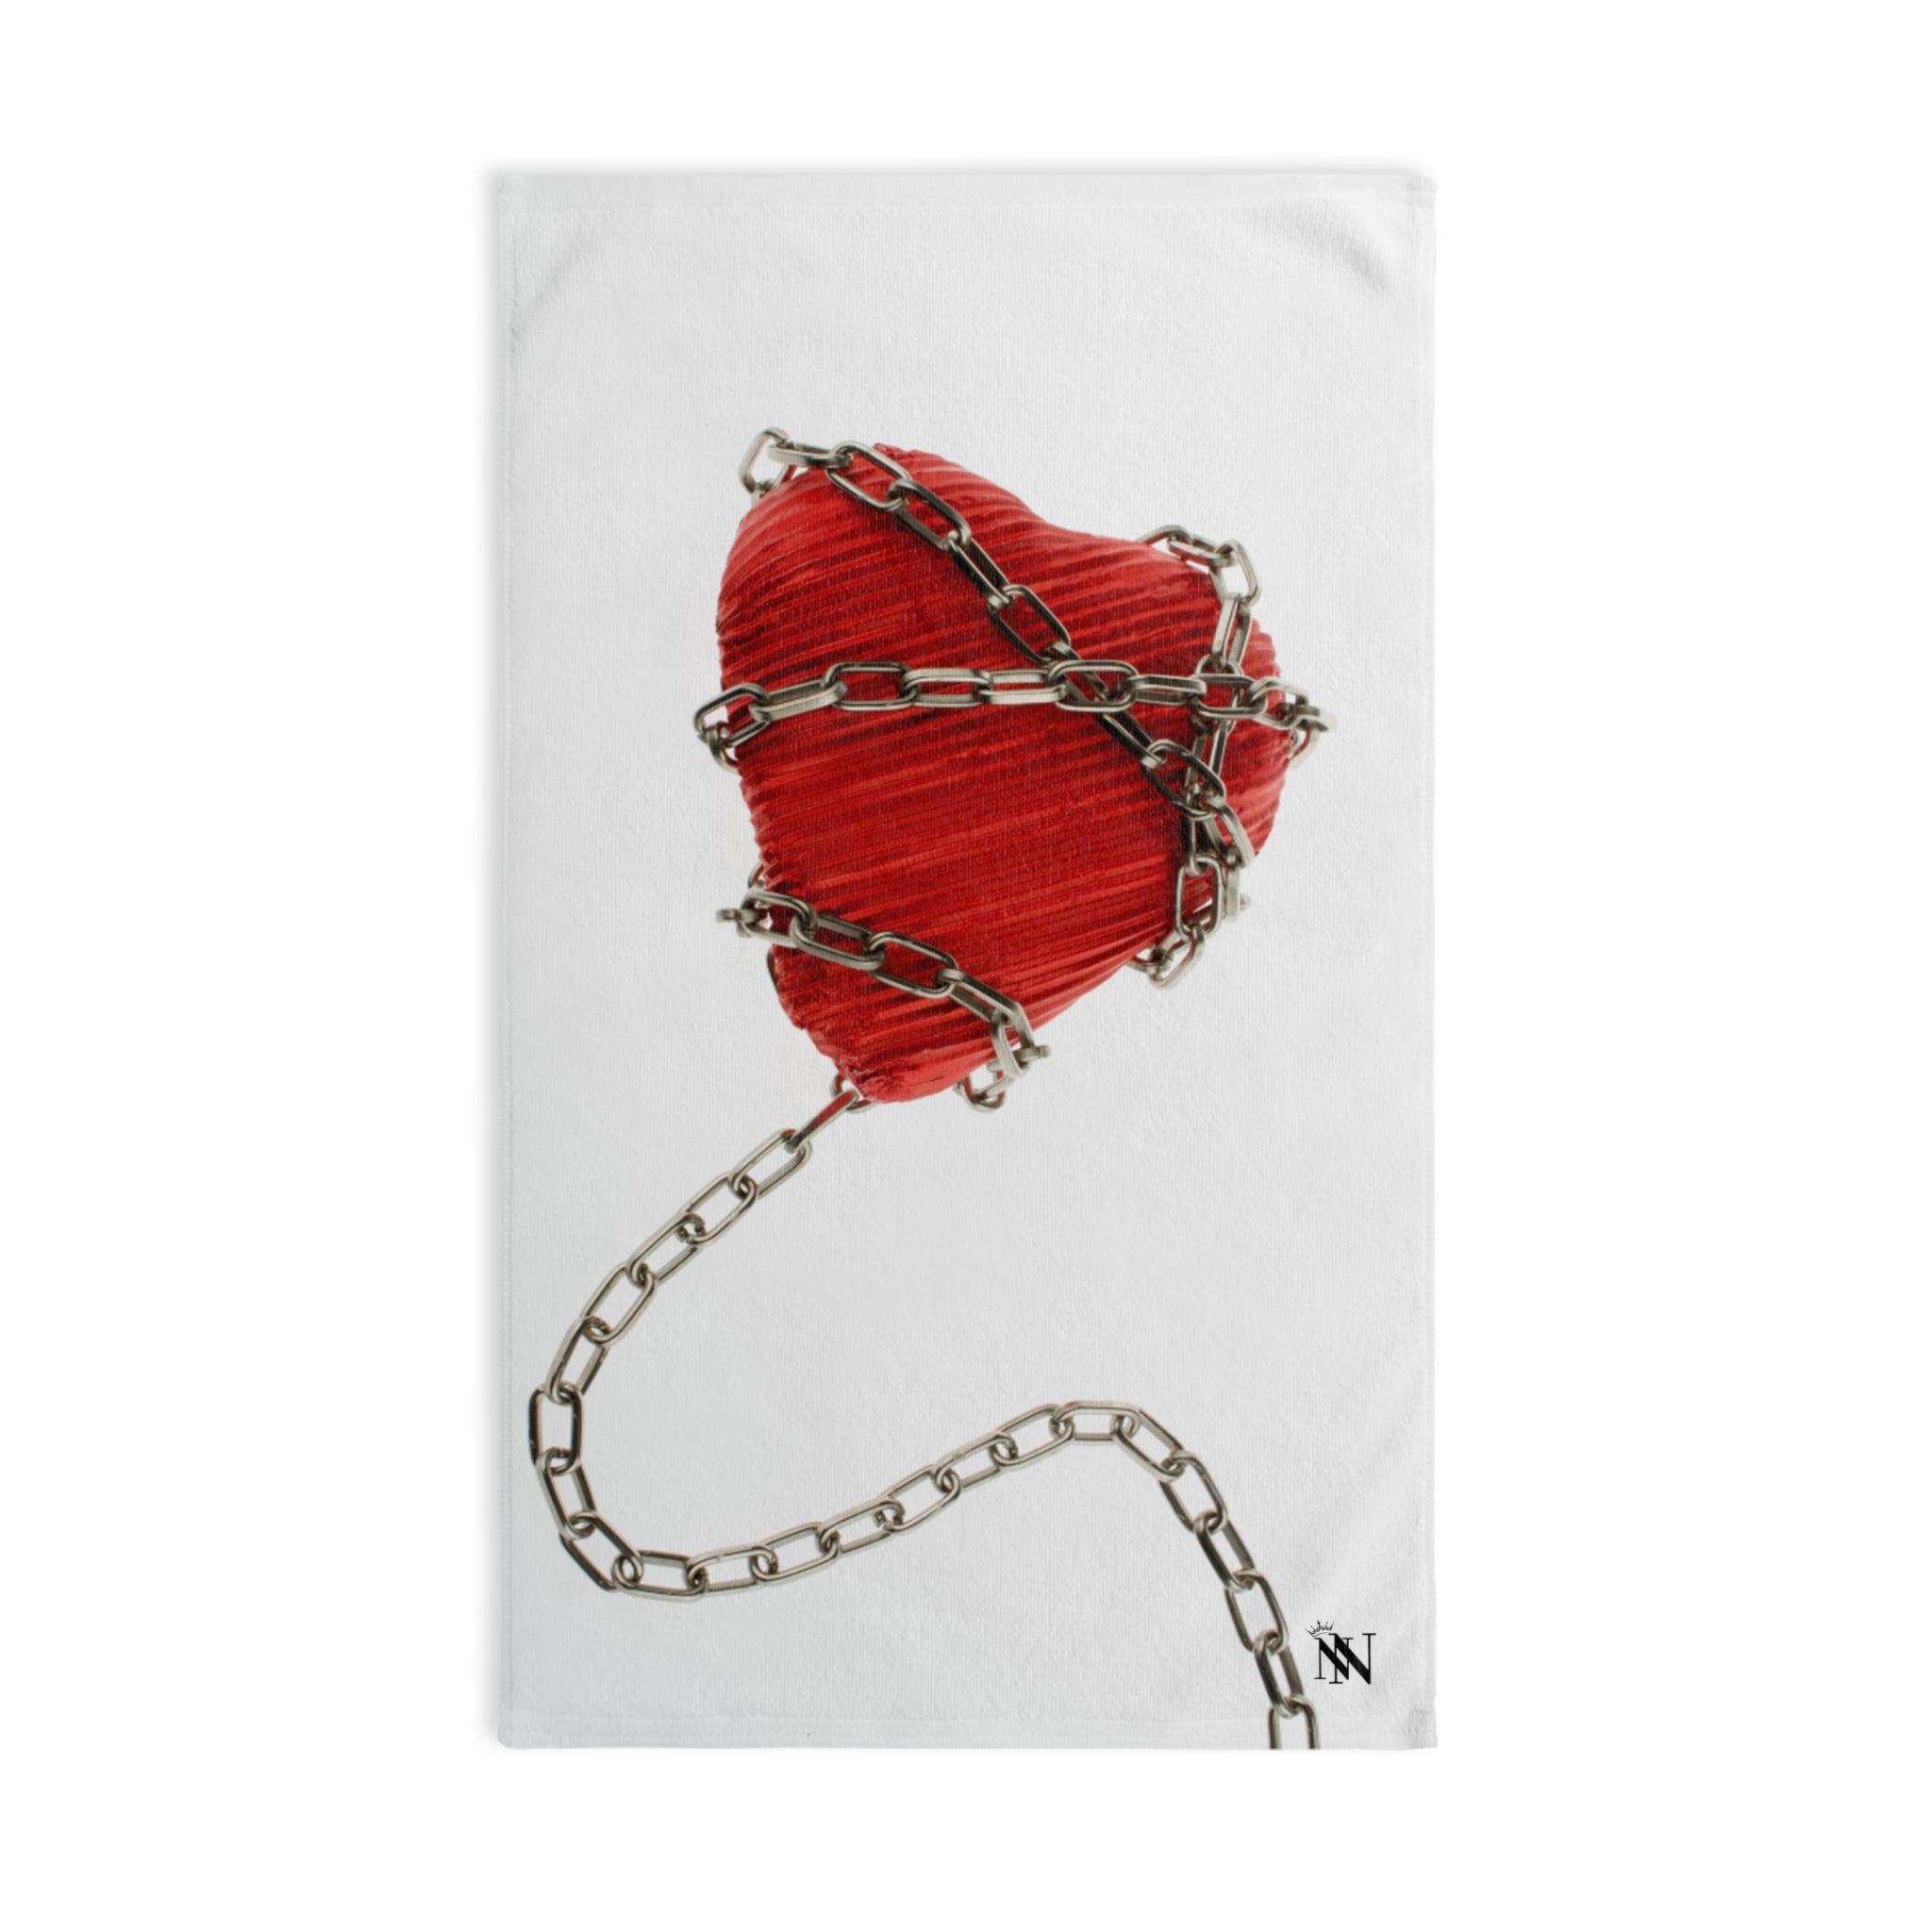 Chained Hearts White | Funny Gifts for Men - Gifts for Him - Birthday Gifts for Men, Him, Her, Husband, Boyfriend, Girlfriend, New Couple Gifts, Fathers & Valentines Day Gifts, Christmas Gifts NECTAR NAPKINS